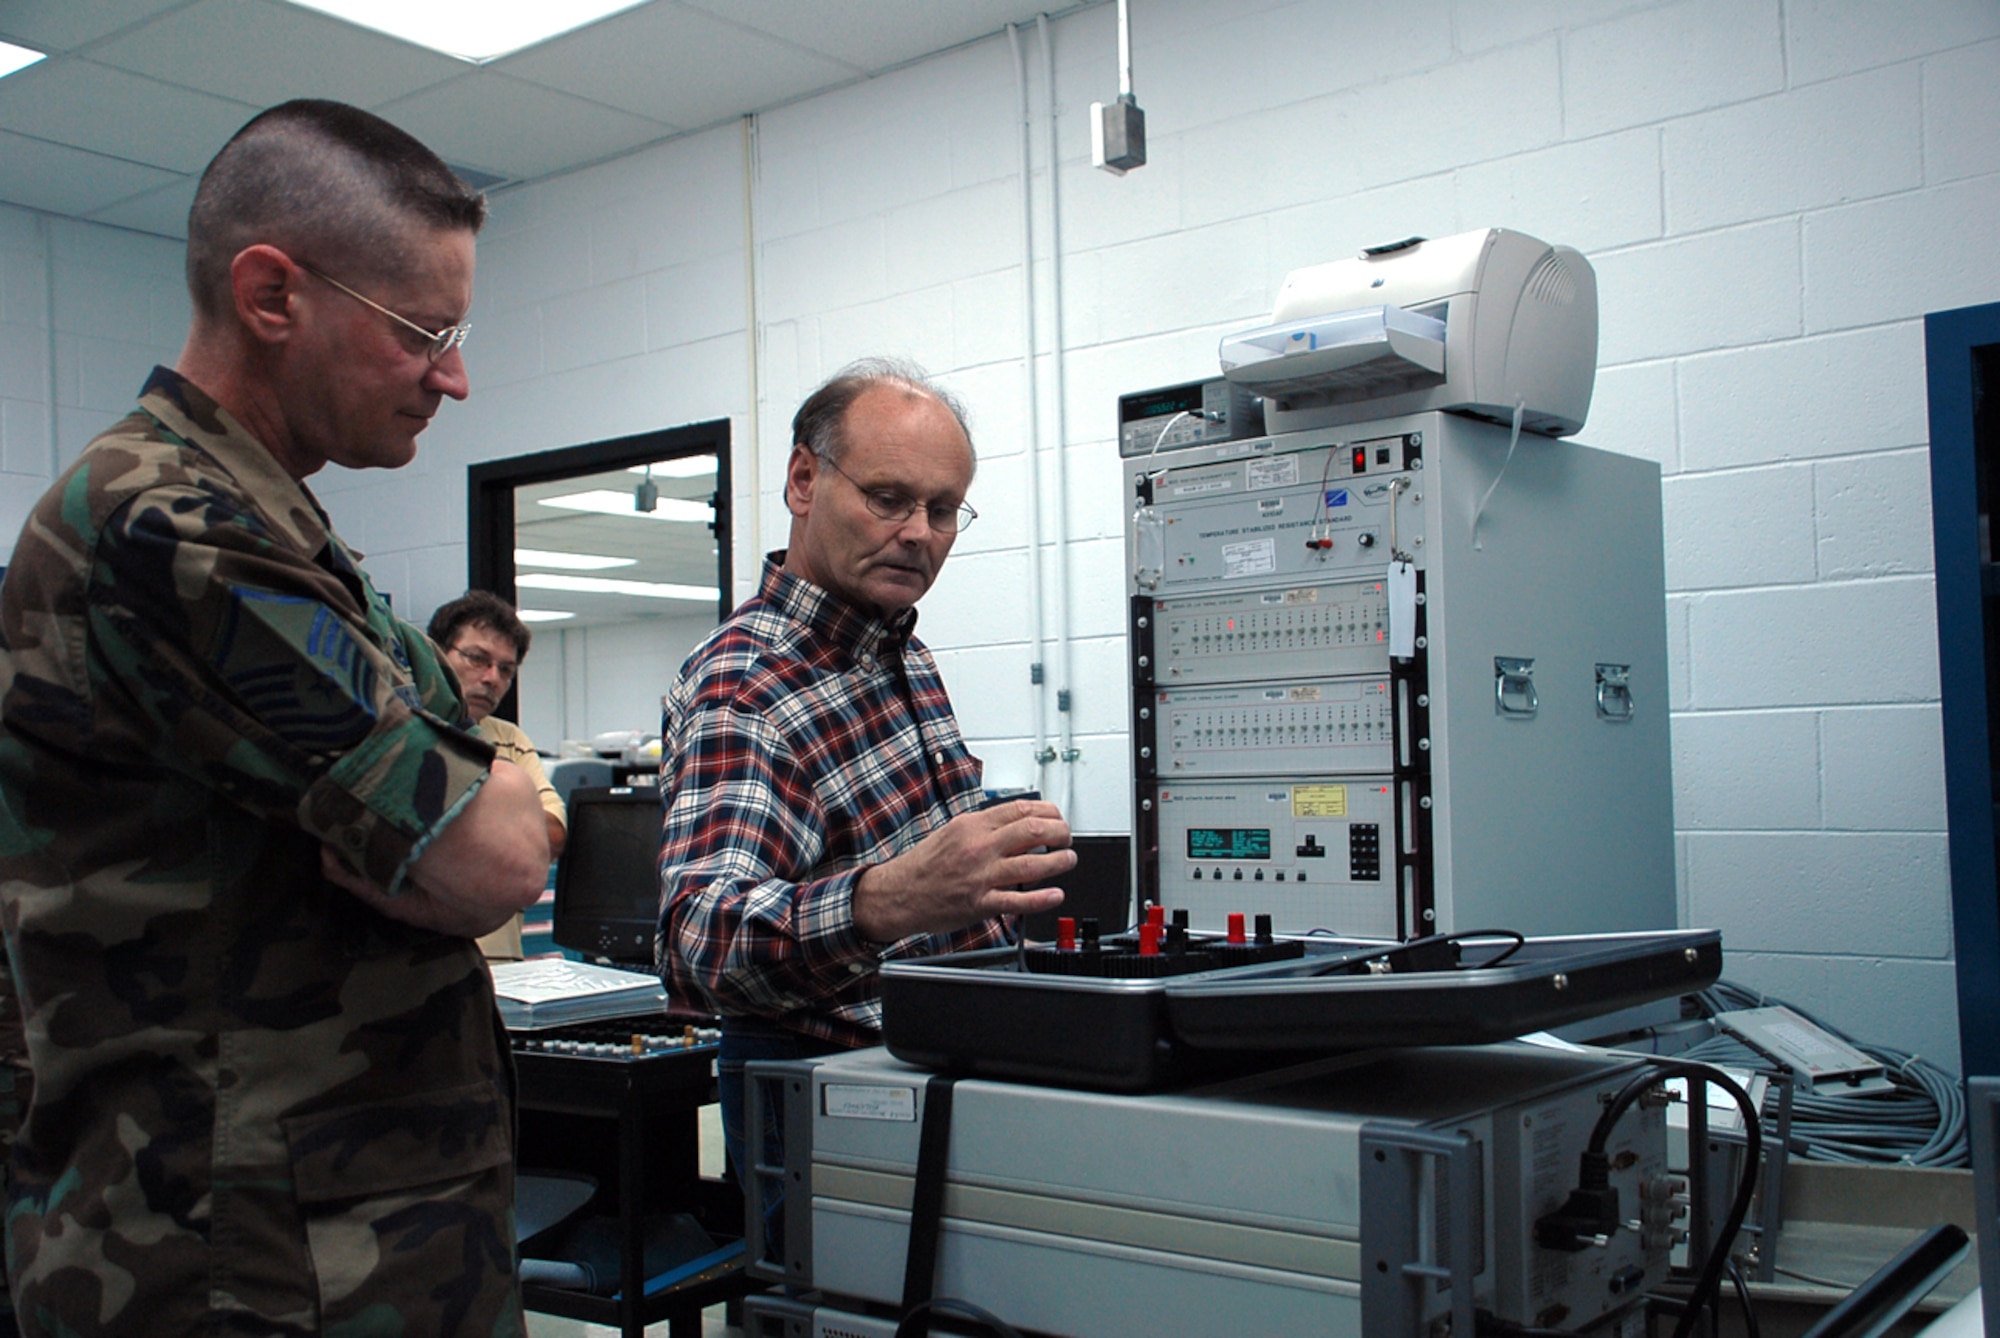 Master Sgt. Richard Jordan, 562nd Combat Sustainment Group, oversees Edward Mulford calibrating a base-reference standard. All Air Force equipment must maintain tracability to the National Institute of Standards and Technology; base-reference standards are vital in the chain of traceability because they are used as standards to calibrate Air Force test, measurement and diagnostic equipment. (U.S. Air Force photo/Tech. Sgt. Kevin Wallace)